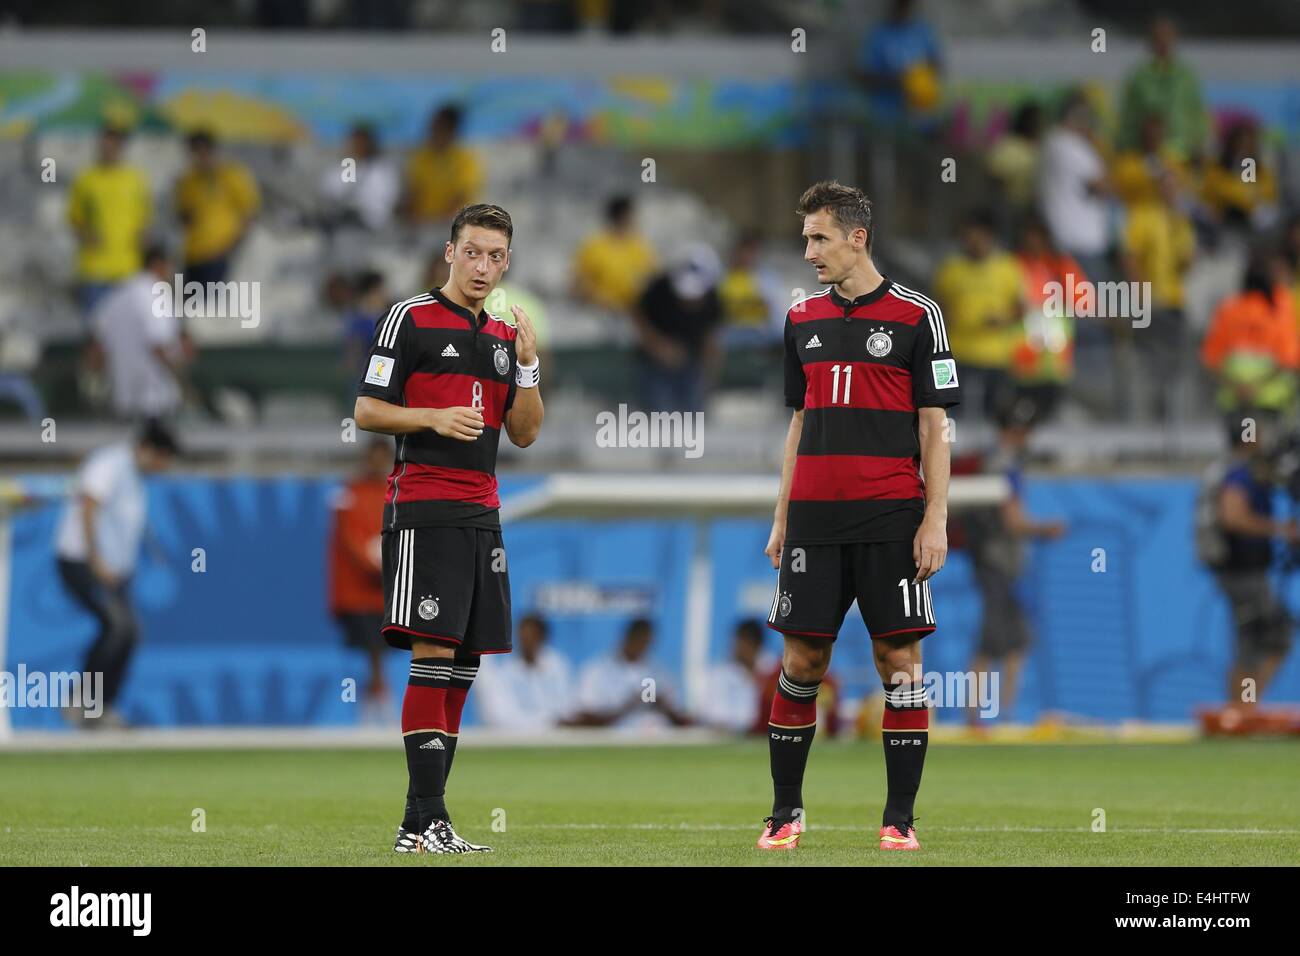 (L-R) Mesut Ozil, Miroslav Klose (GER), JULY 8, 2014 - Football / Soccer : FIFA World Cup Brazil 2014 Semi Final match between Brazil and Germany at the Estadio Mineirao in Belo Horizonte, Brazil. (Photo by AFLO) [3604] Stock Photo